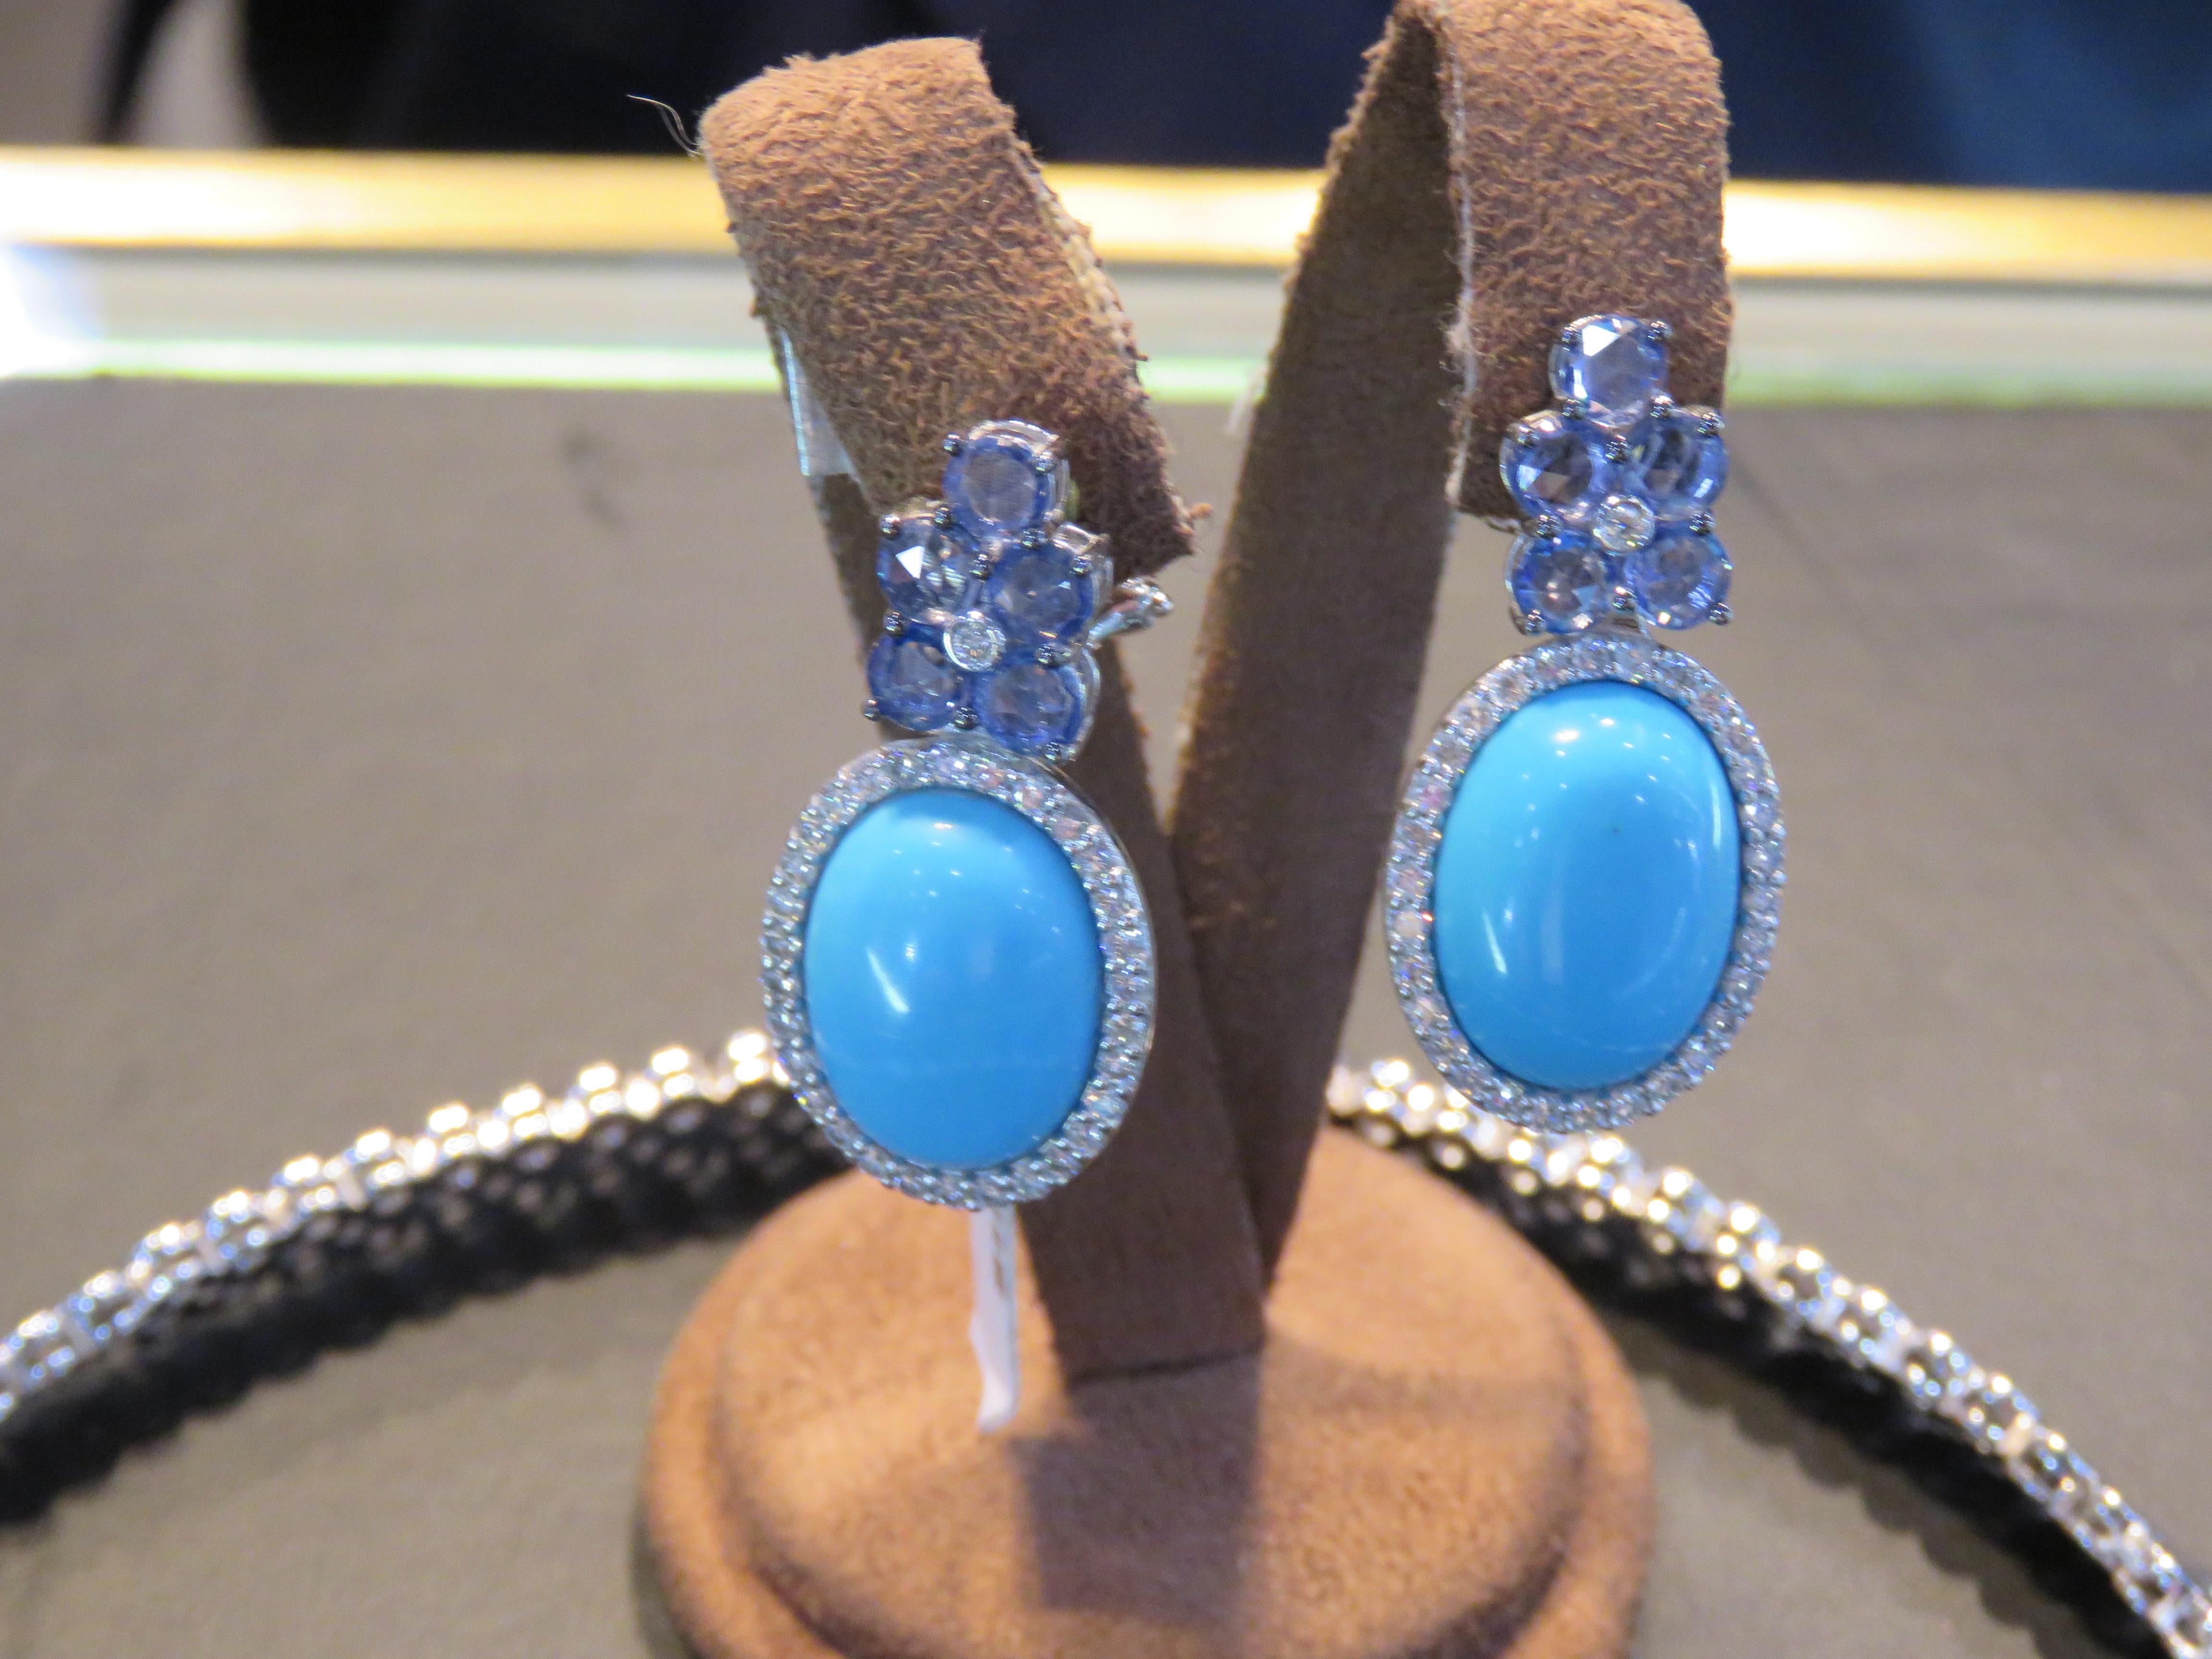 The Following Items we are offering is a Pair of Rare 18KT Gold Large Turquoise Diamond Blue Sapphire Dangle Earrings. Earrings are comprised of Finely Set Gorgeous Large Oval Gorgeous Turquoise Framed with Magnificent Glittering Diamonds Earrings.